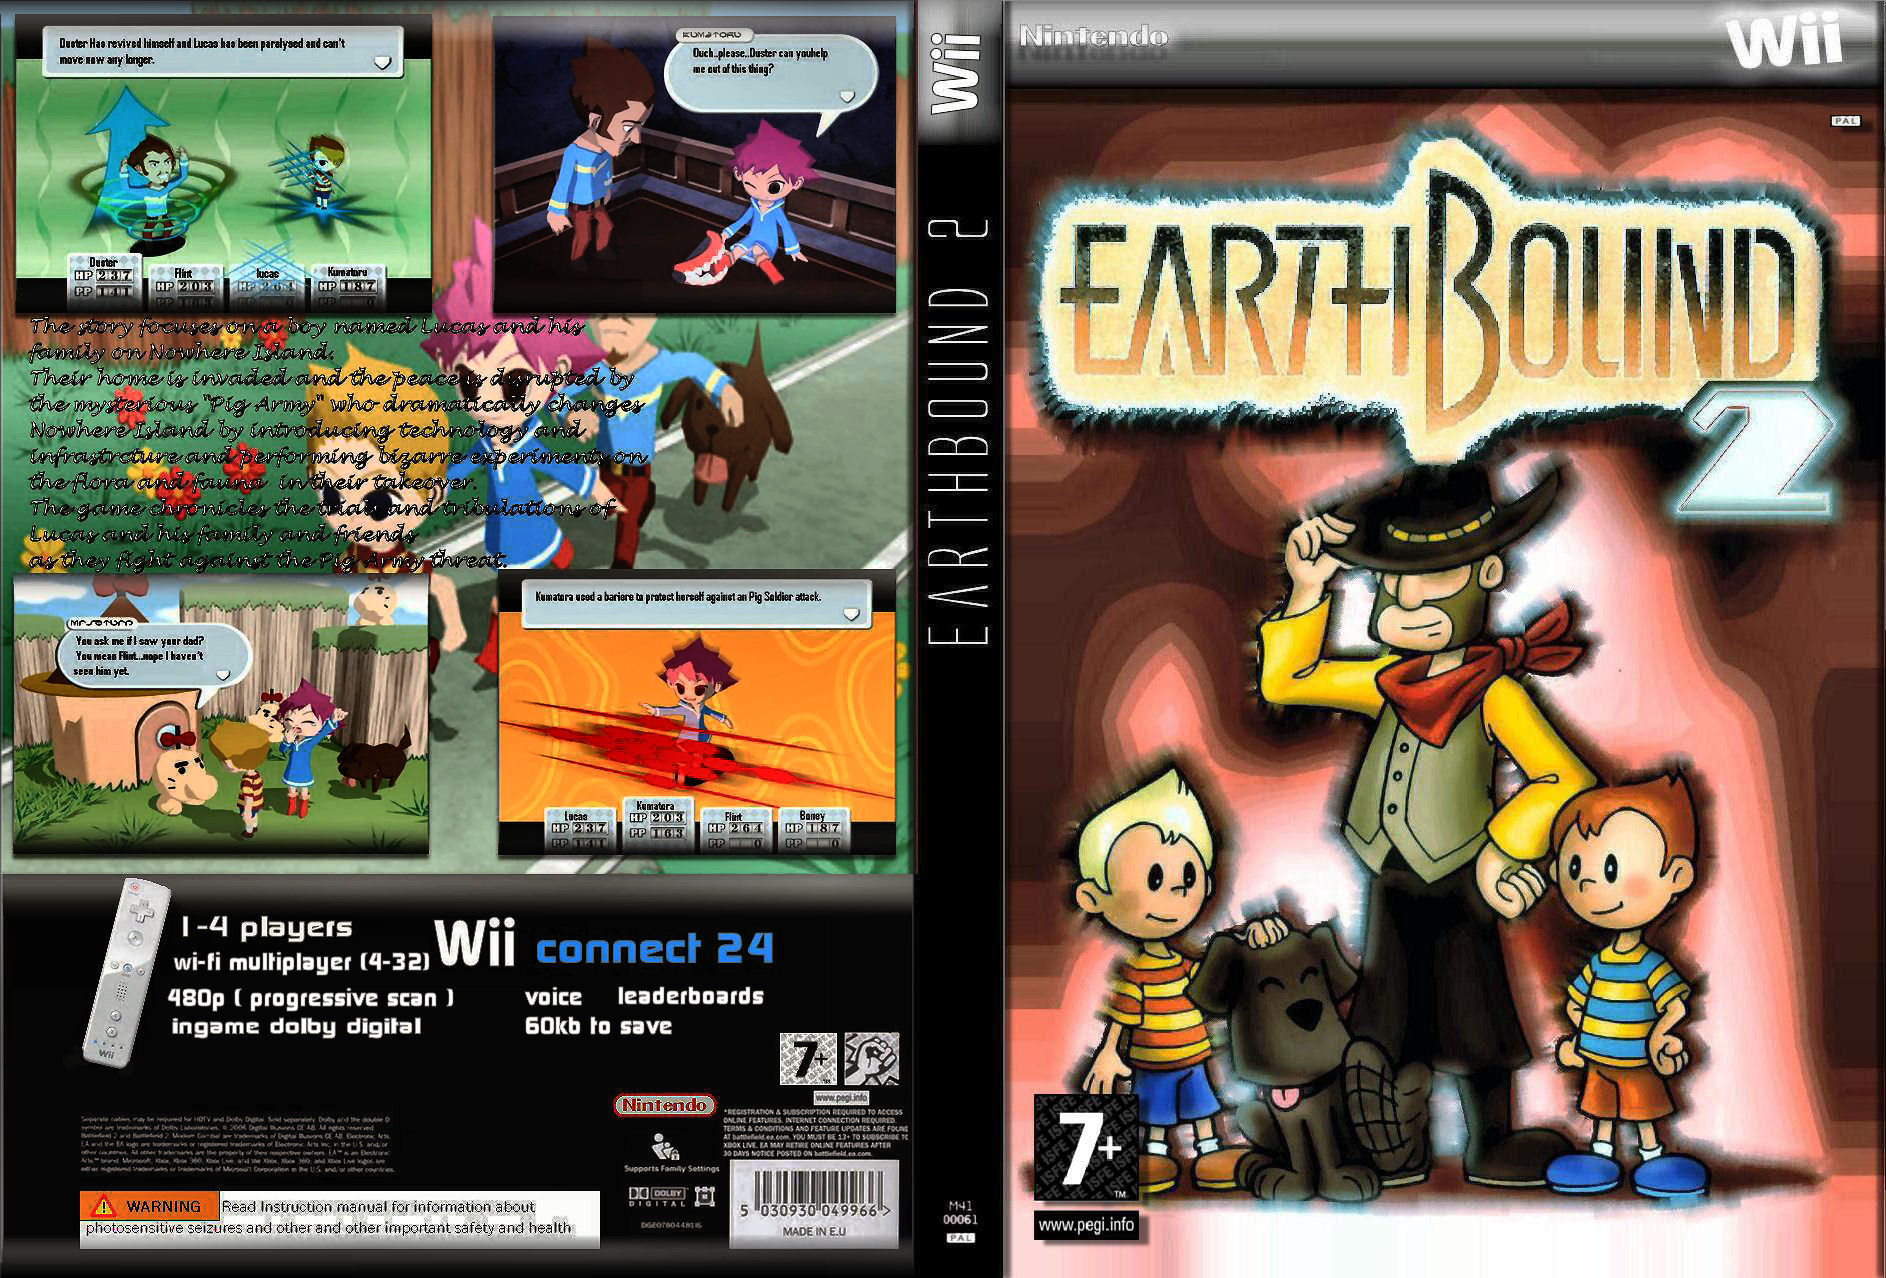 download earthbound 2